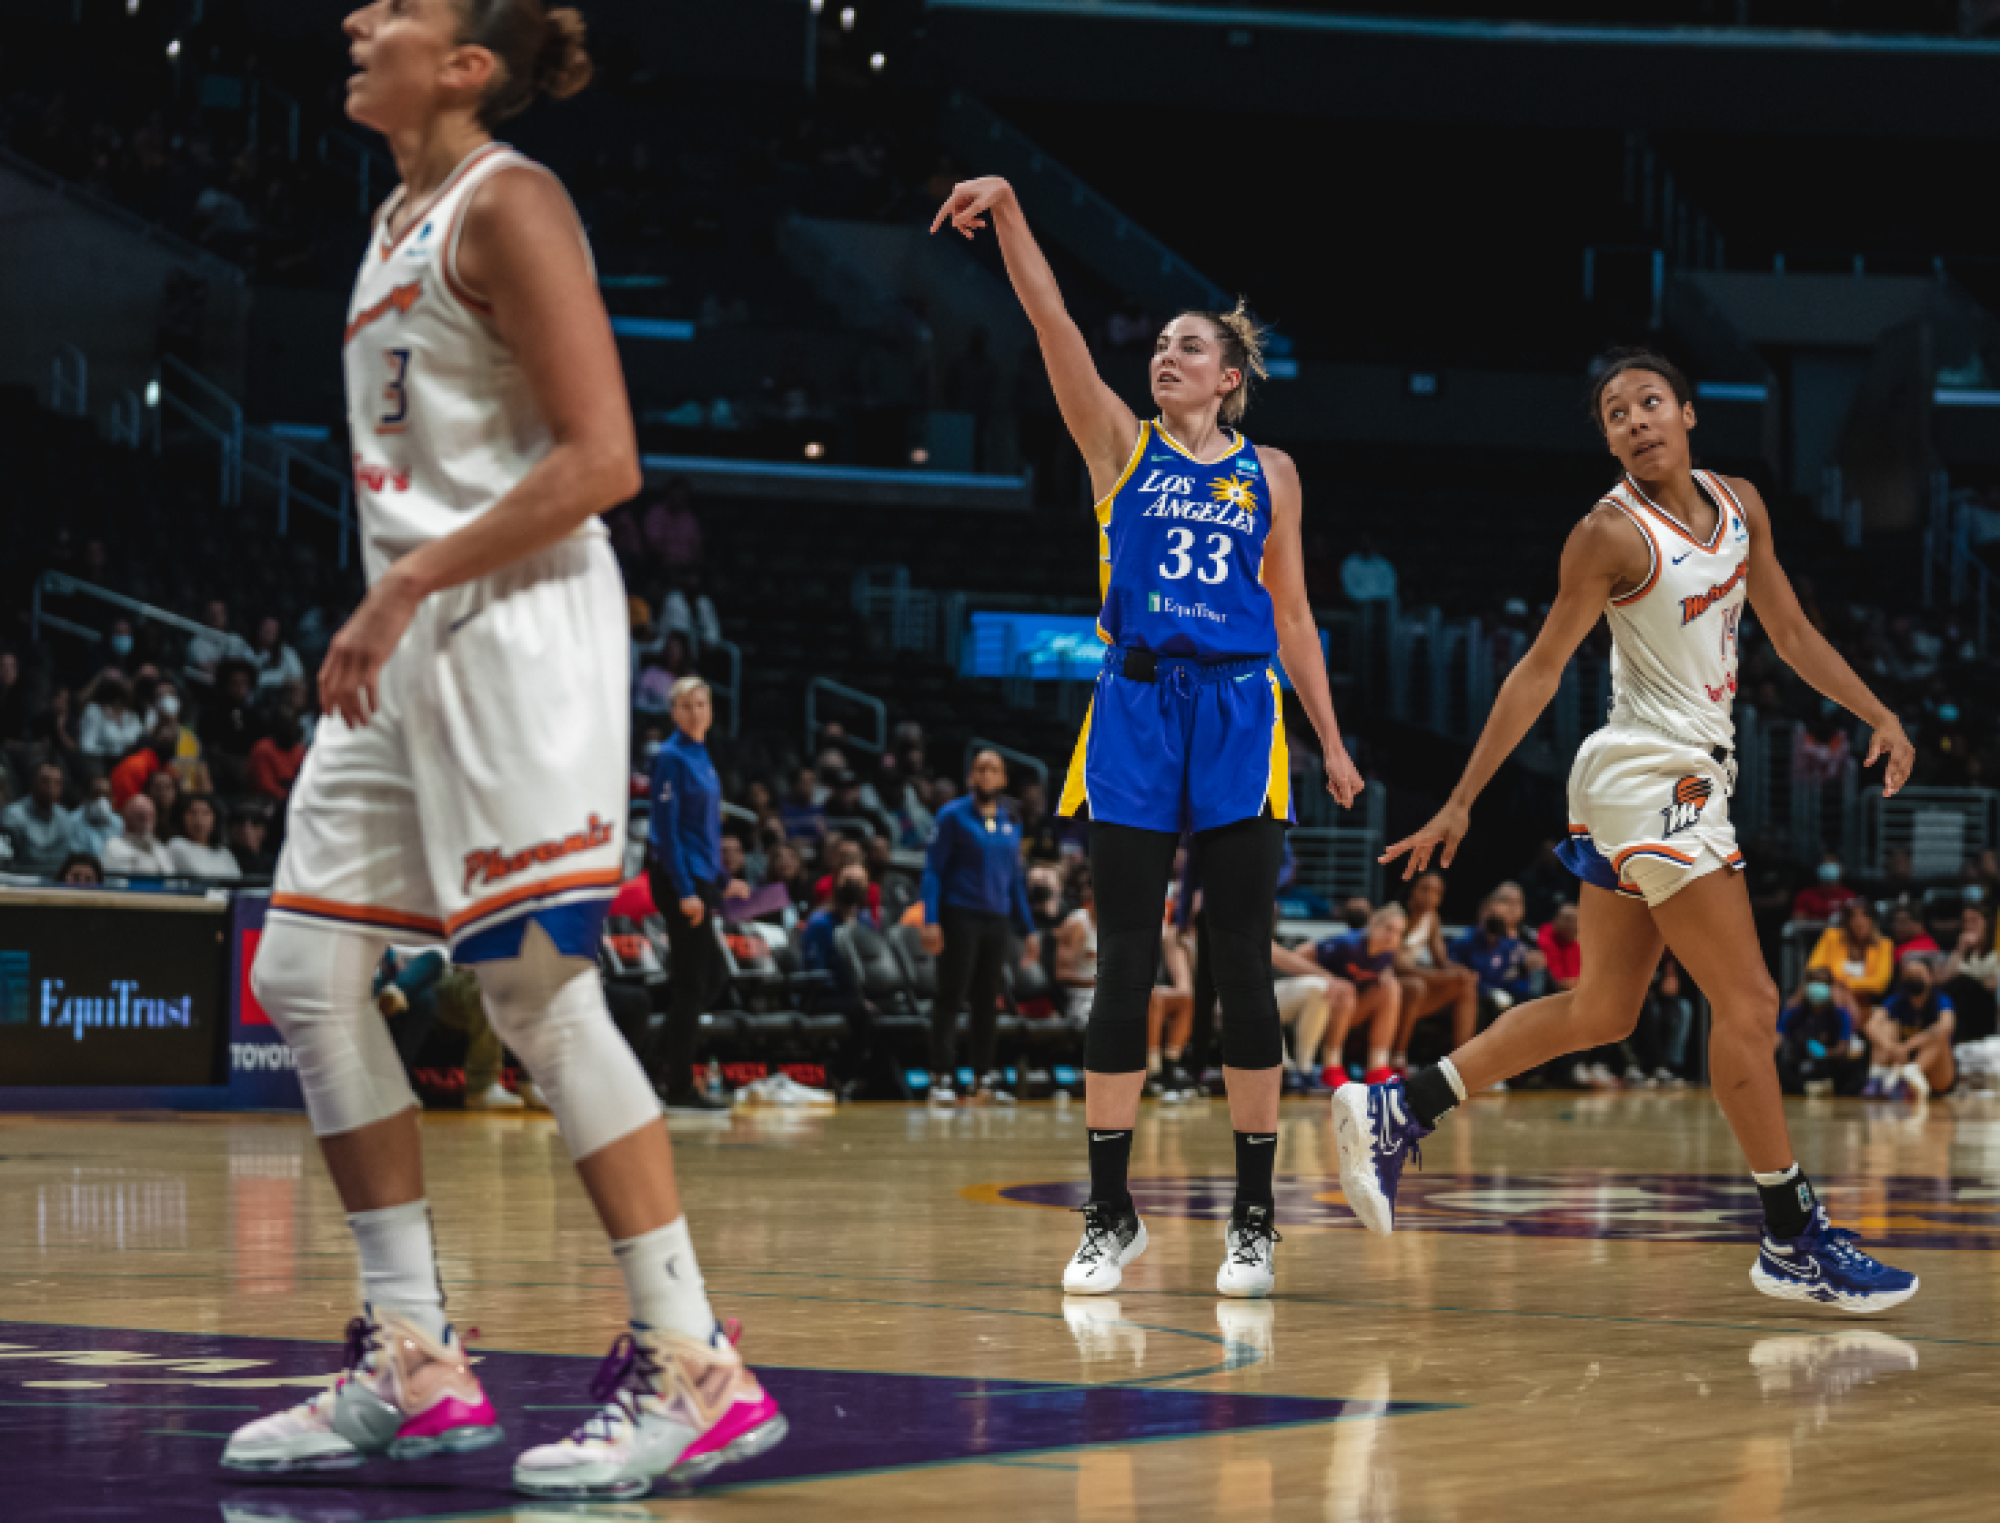 Sparks striker Katie Lou Samuelson followed up with a three-point shot.